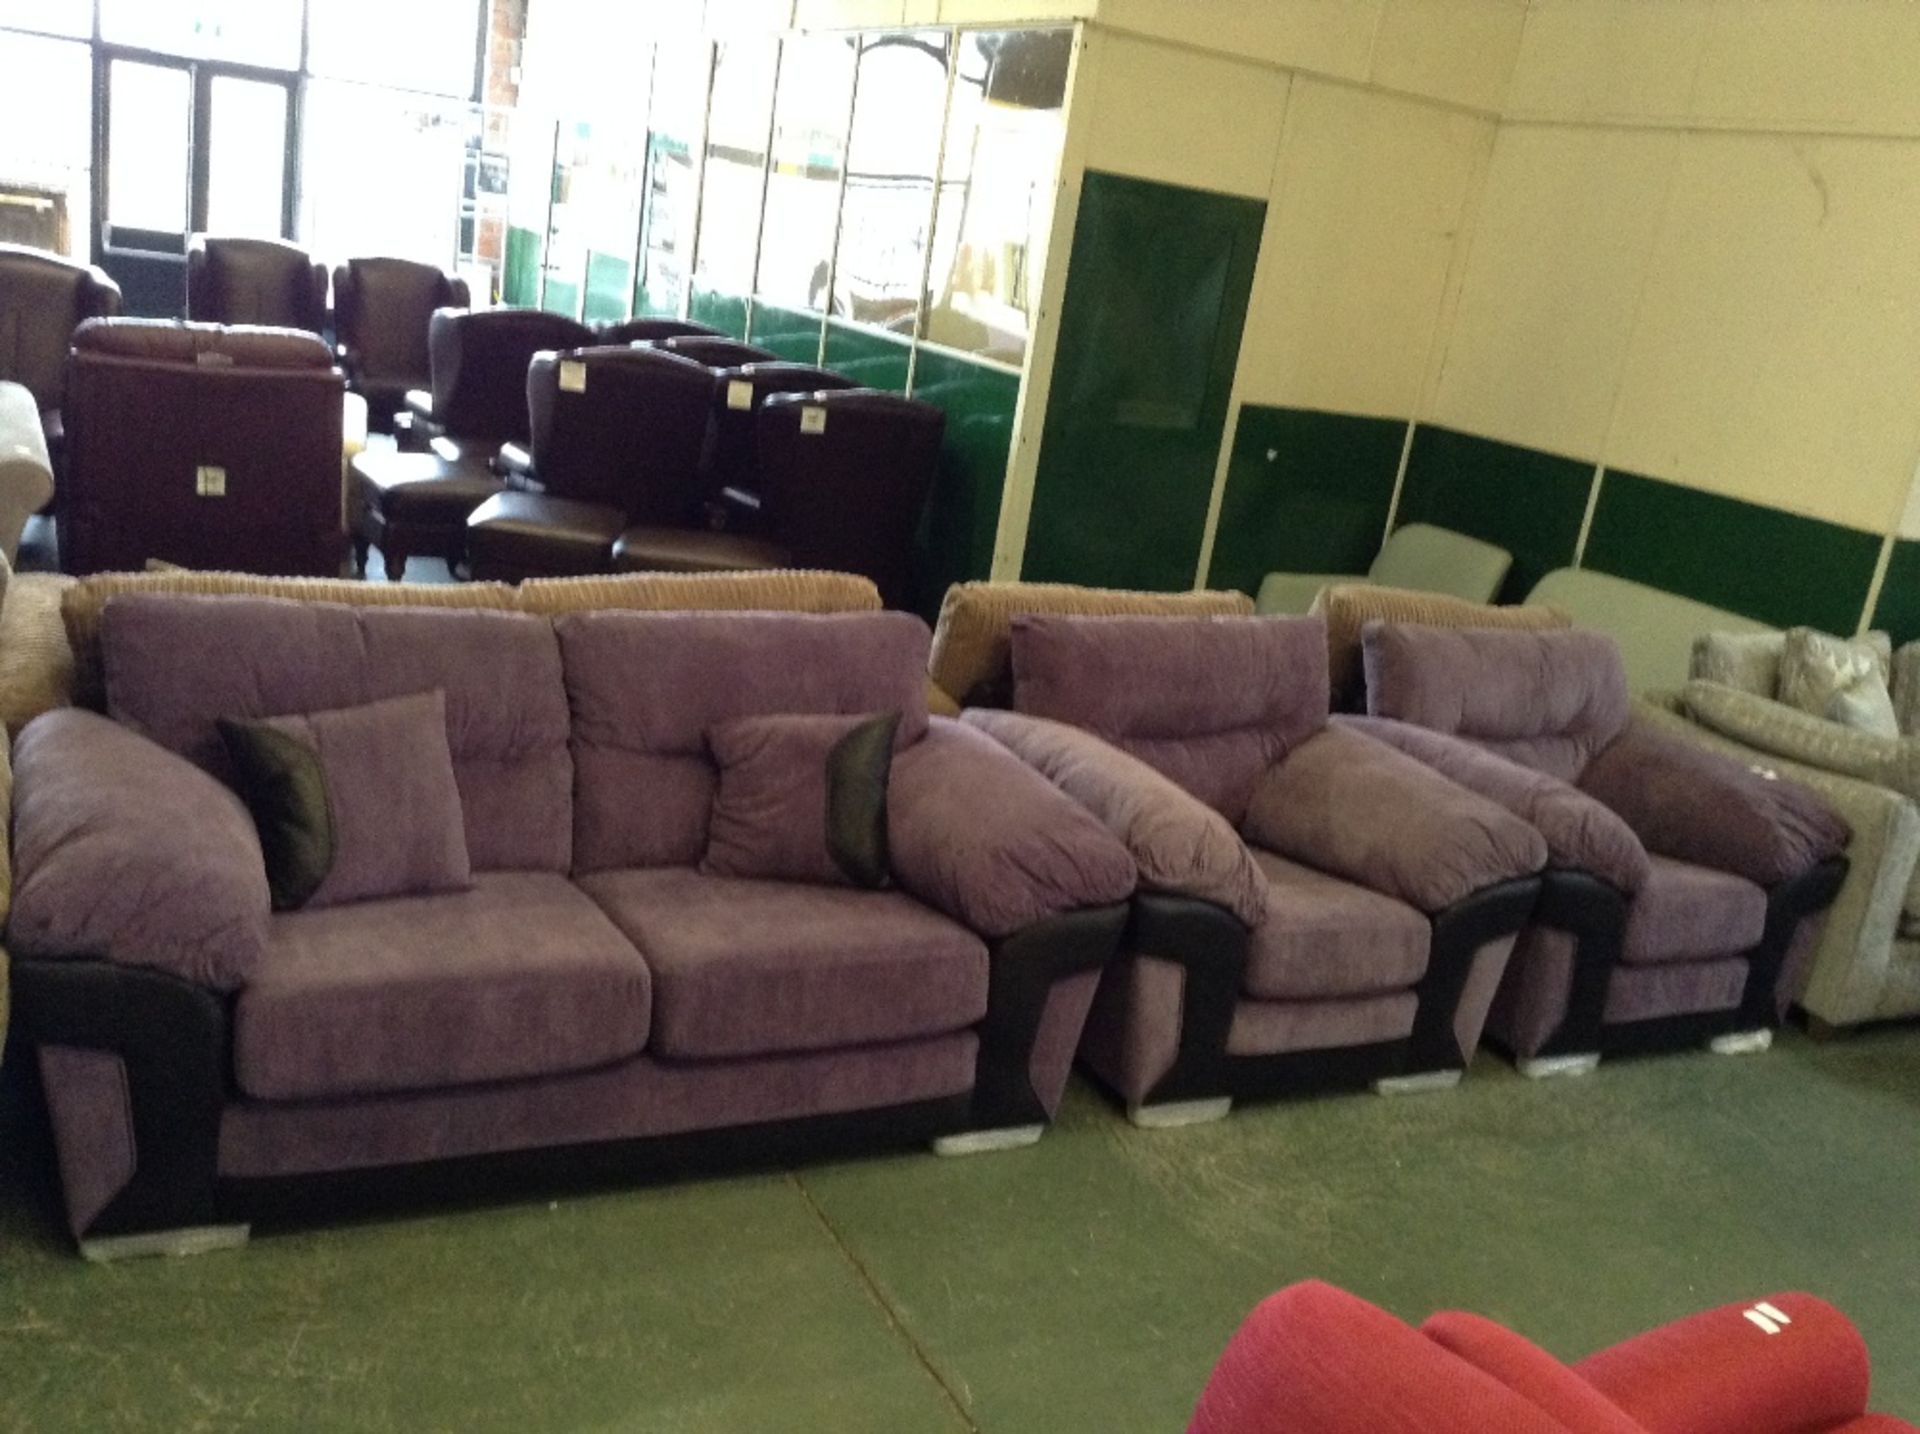 PURPLE AND BLACK 3 SEATER SOFA AND 2 CHAIRS (4490/